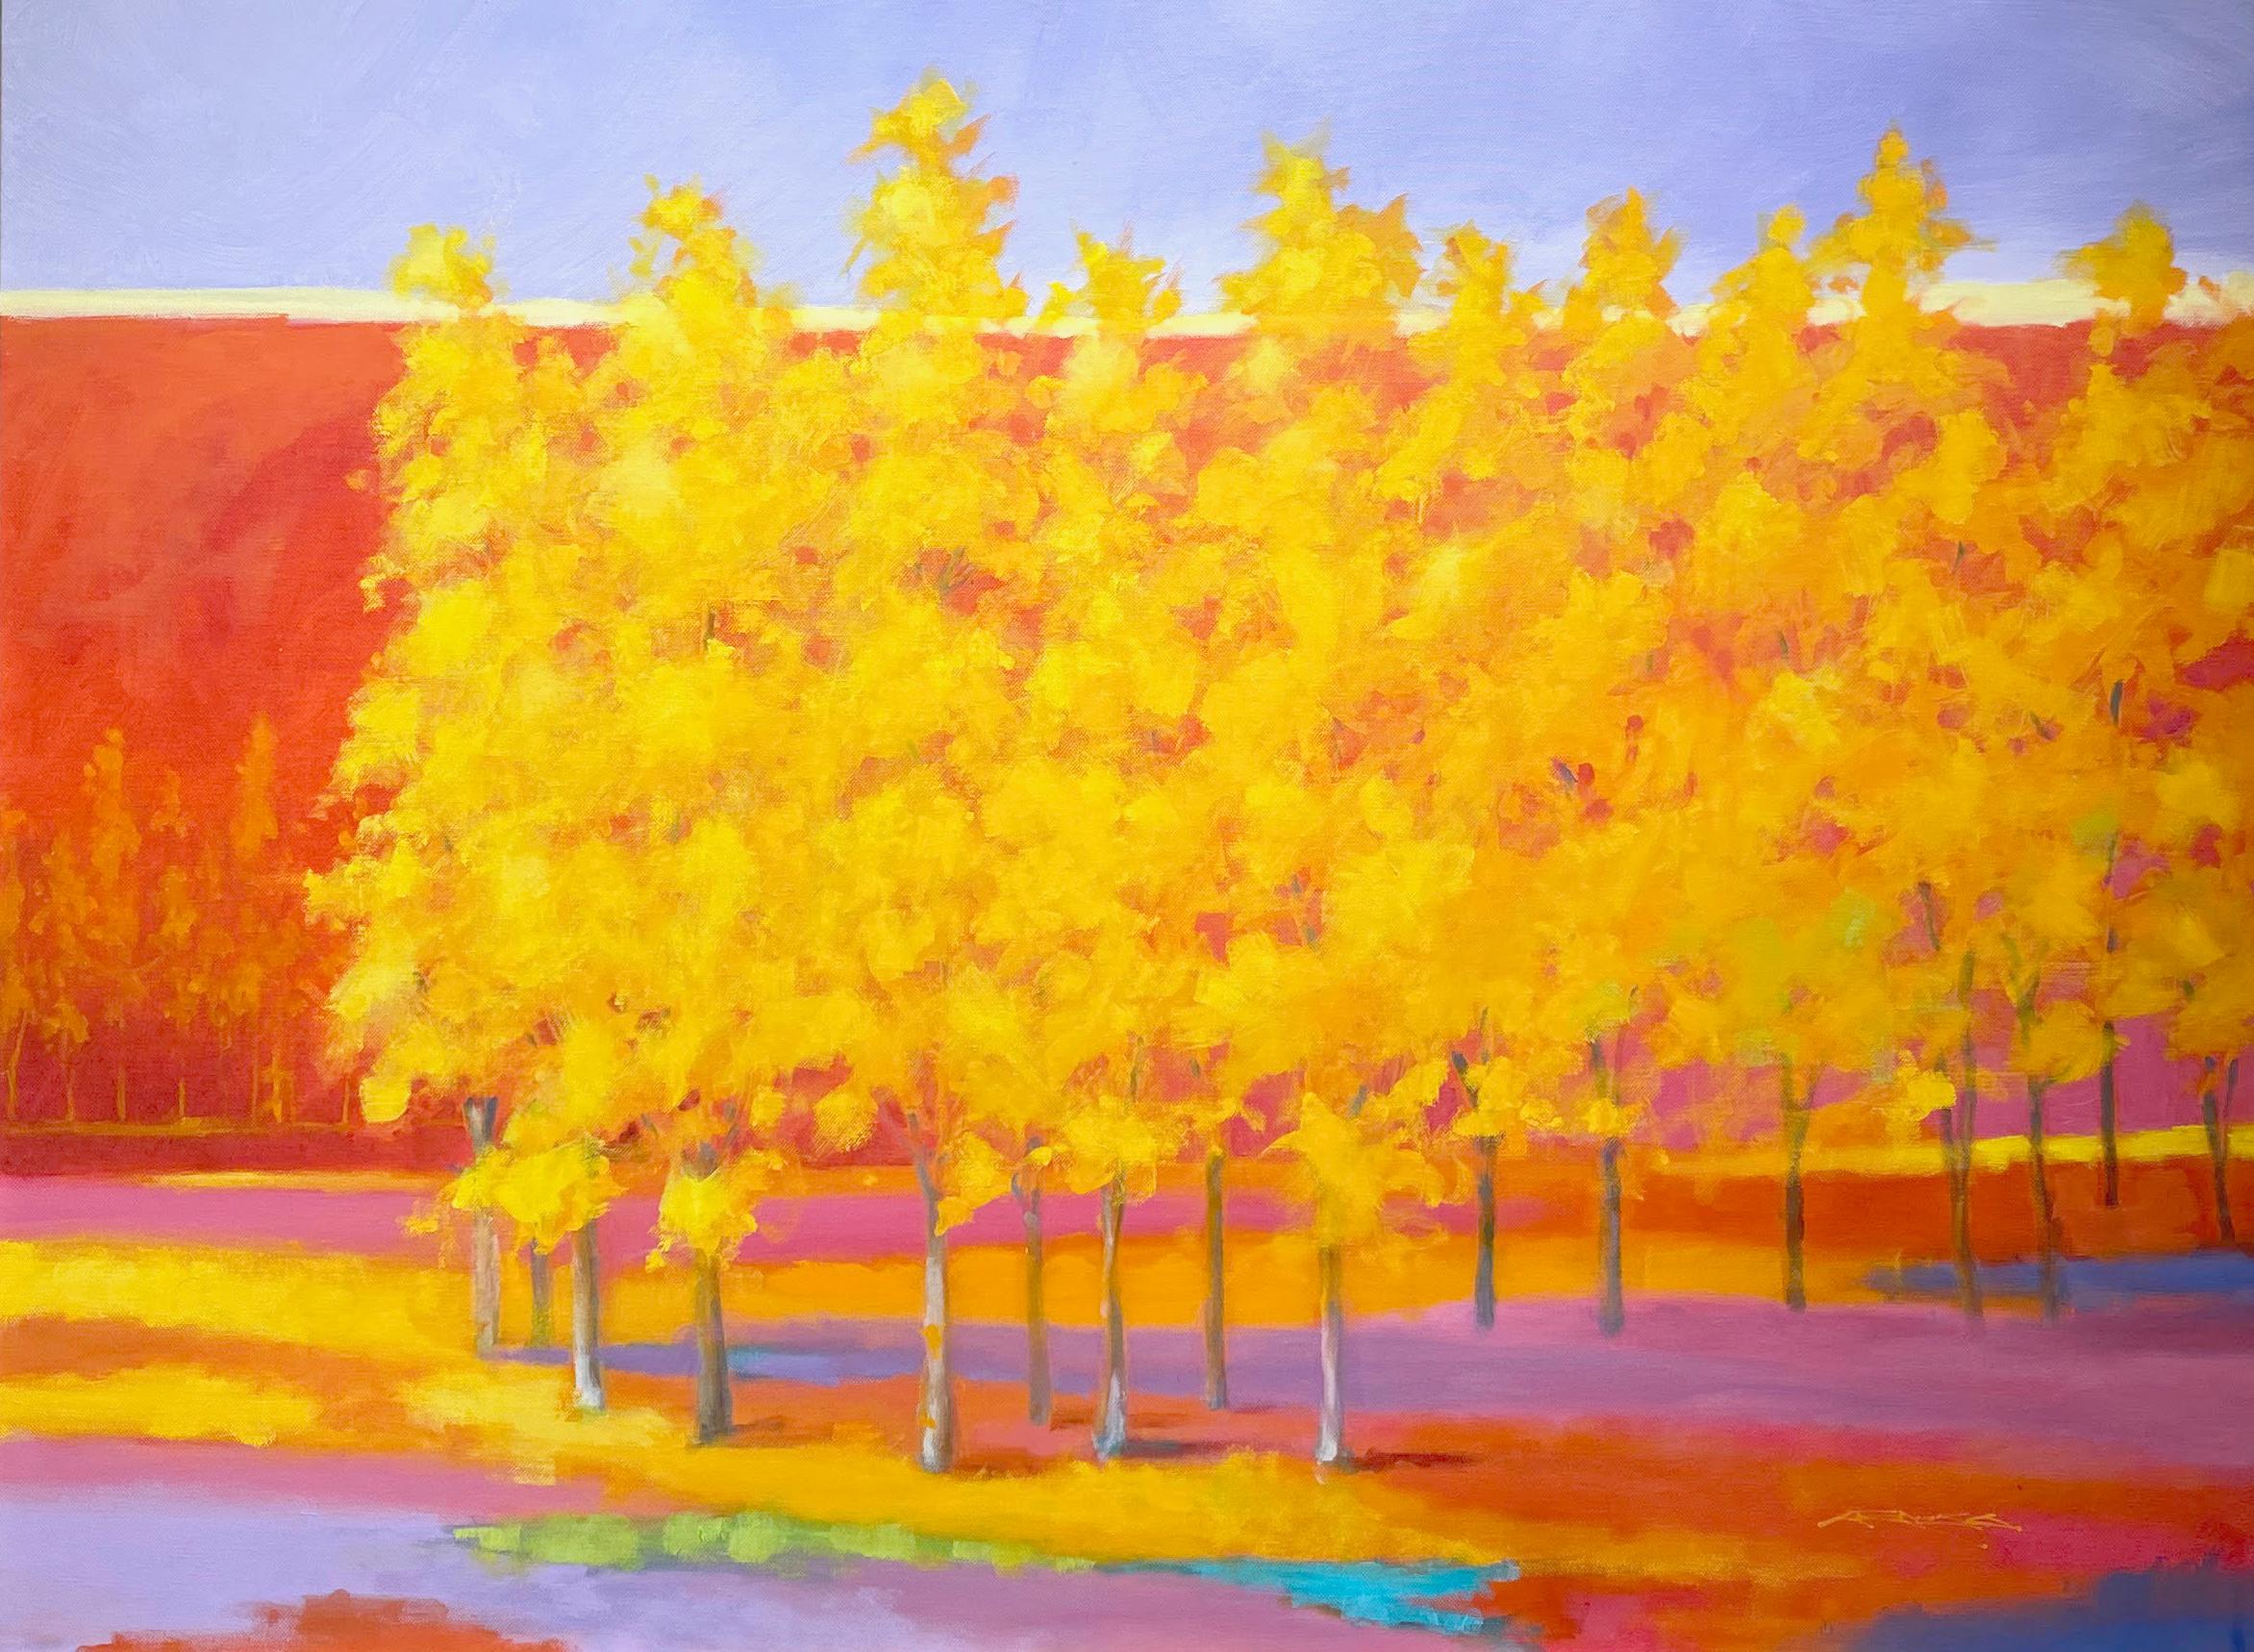 Charles Emery Ross Landscape Painting - C.E. Ross, "Beautiful Day", Colorful Abstract Forest Landscape Acrylic on Canvas